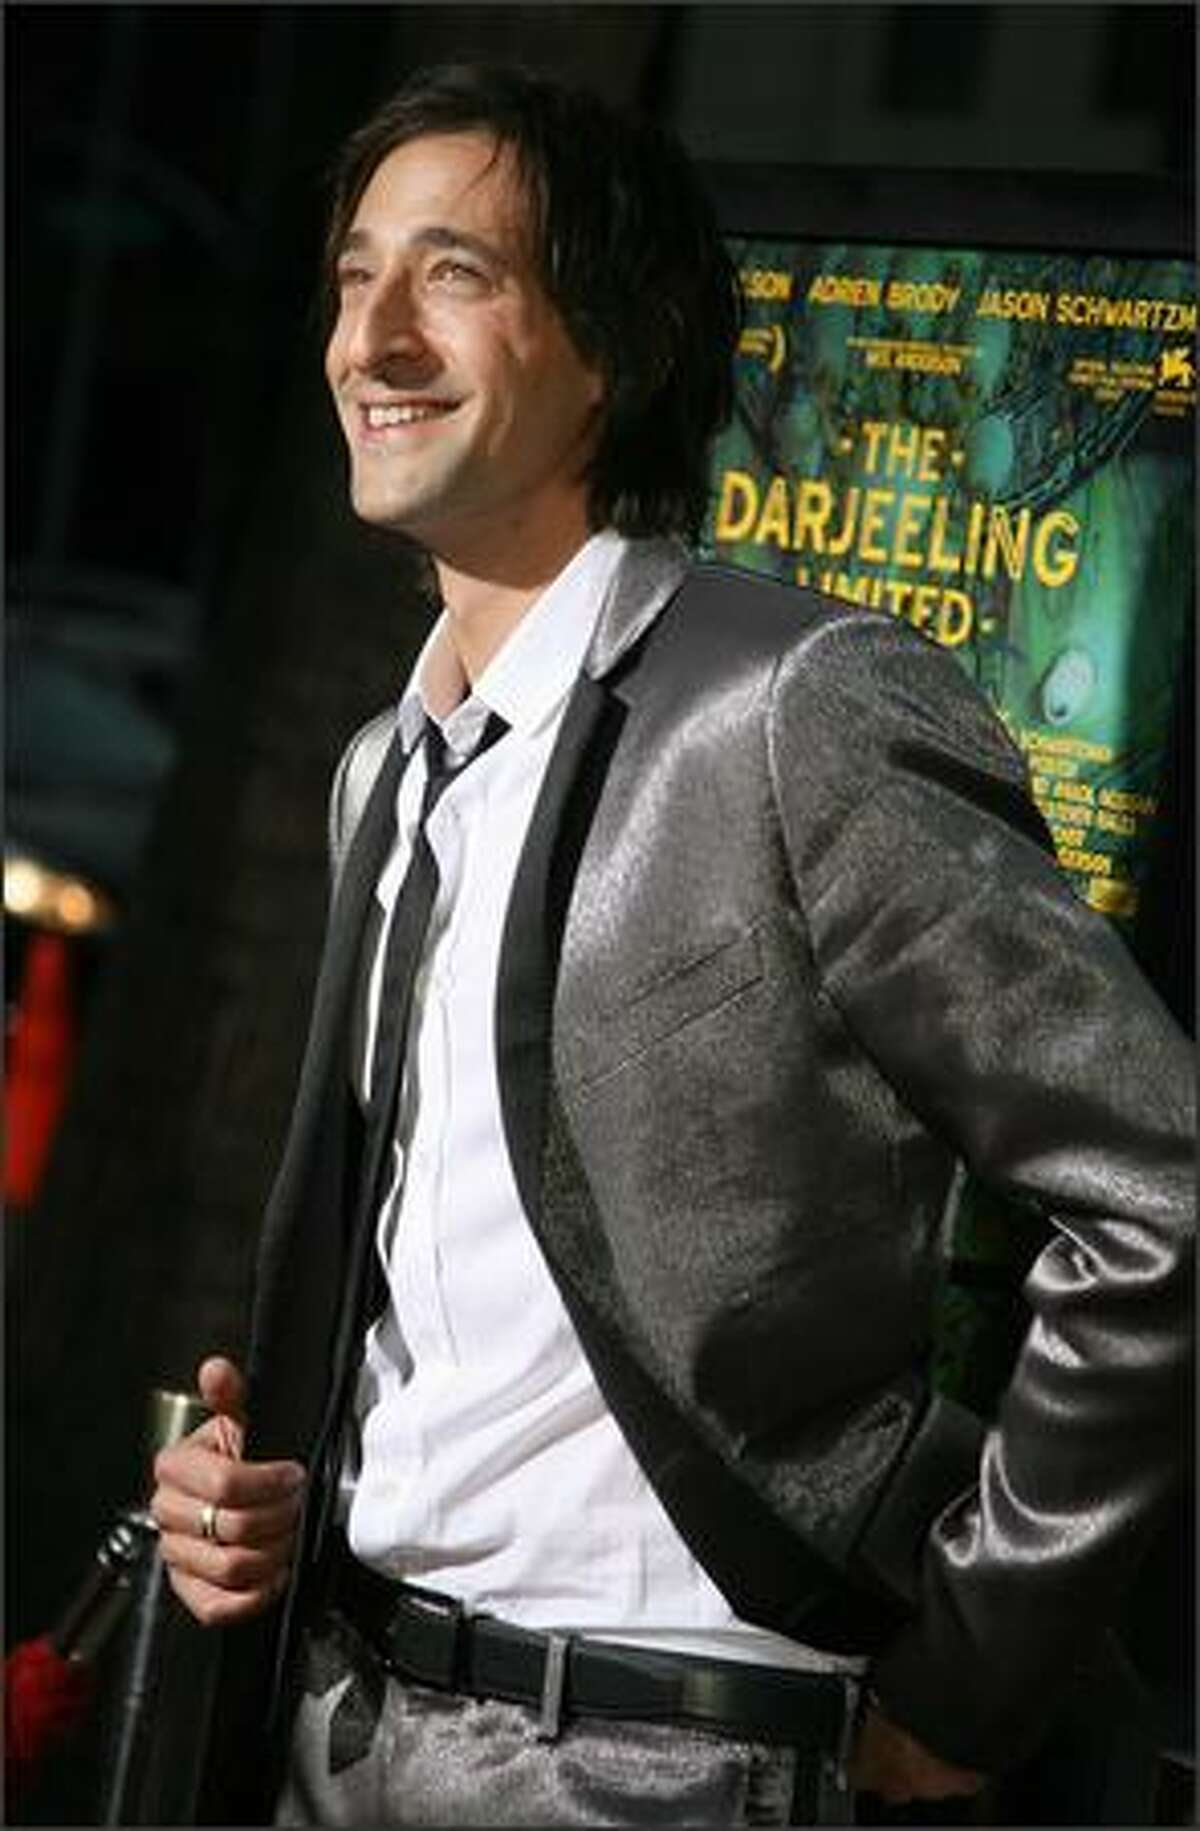 Actor Adrien Brody arrives at the premiere of The Darjeeling Limited in Beverly Hills, California. The film is about three American brothers, who have not spoken to each other in a year. They set off on a train voyage across India with a plan to find themselves and bond with each other.